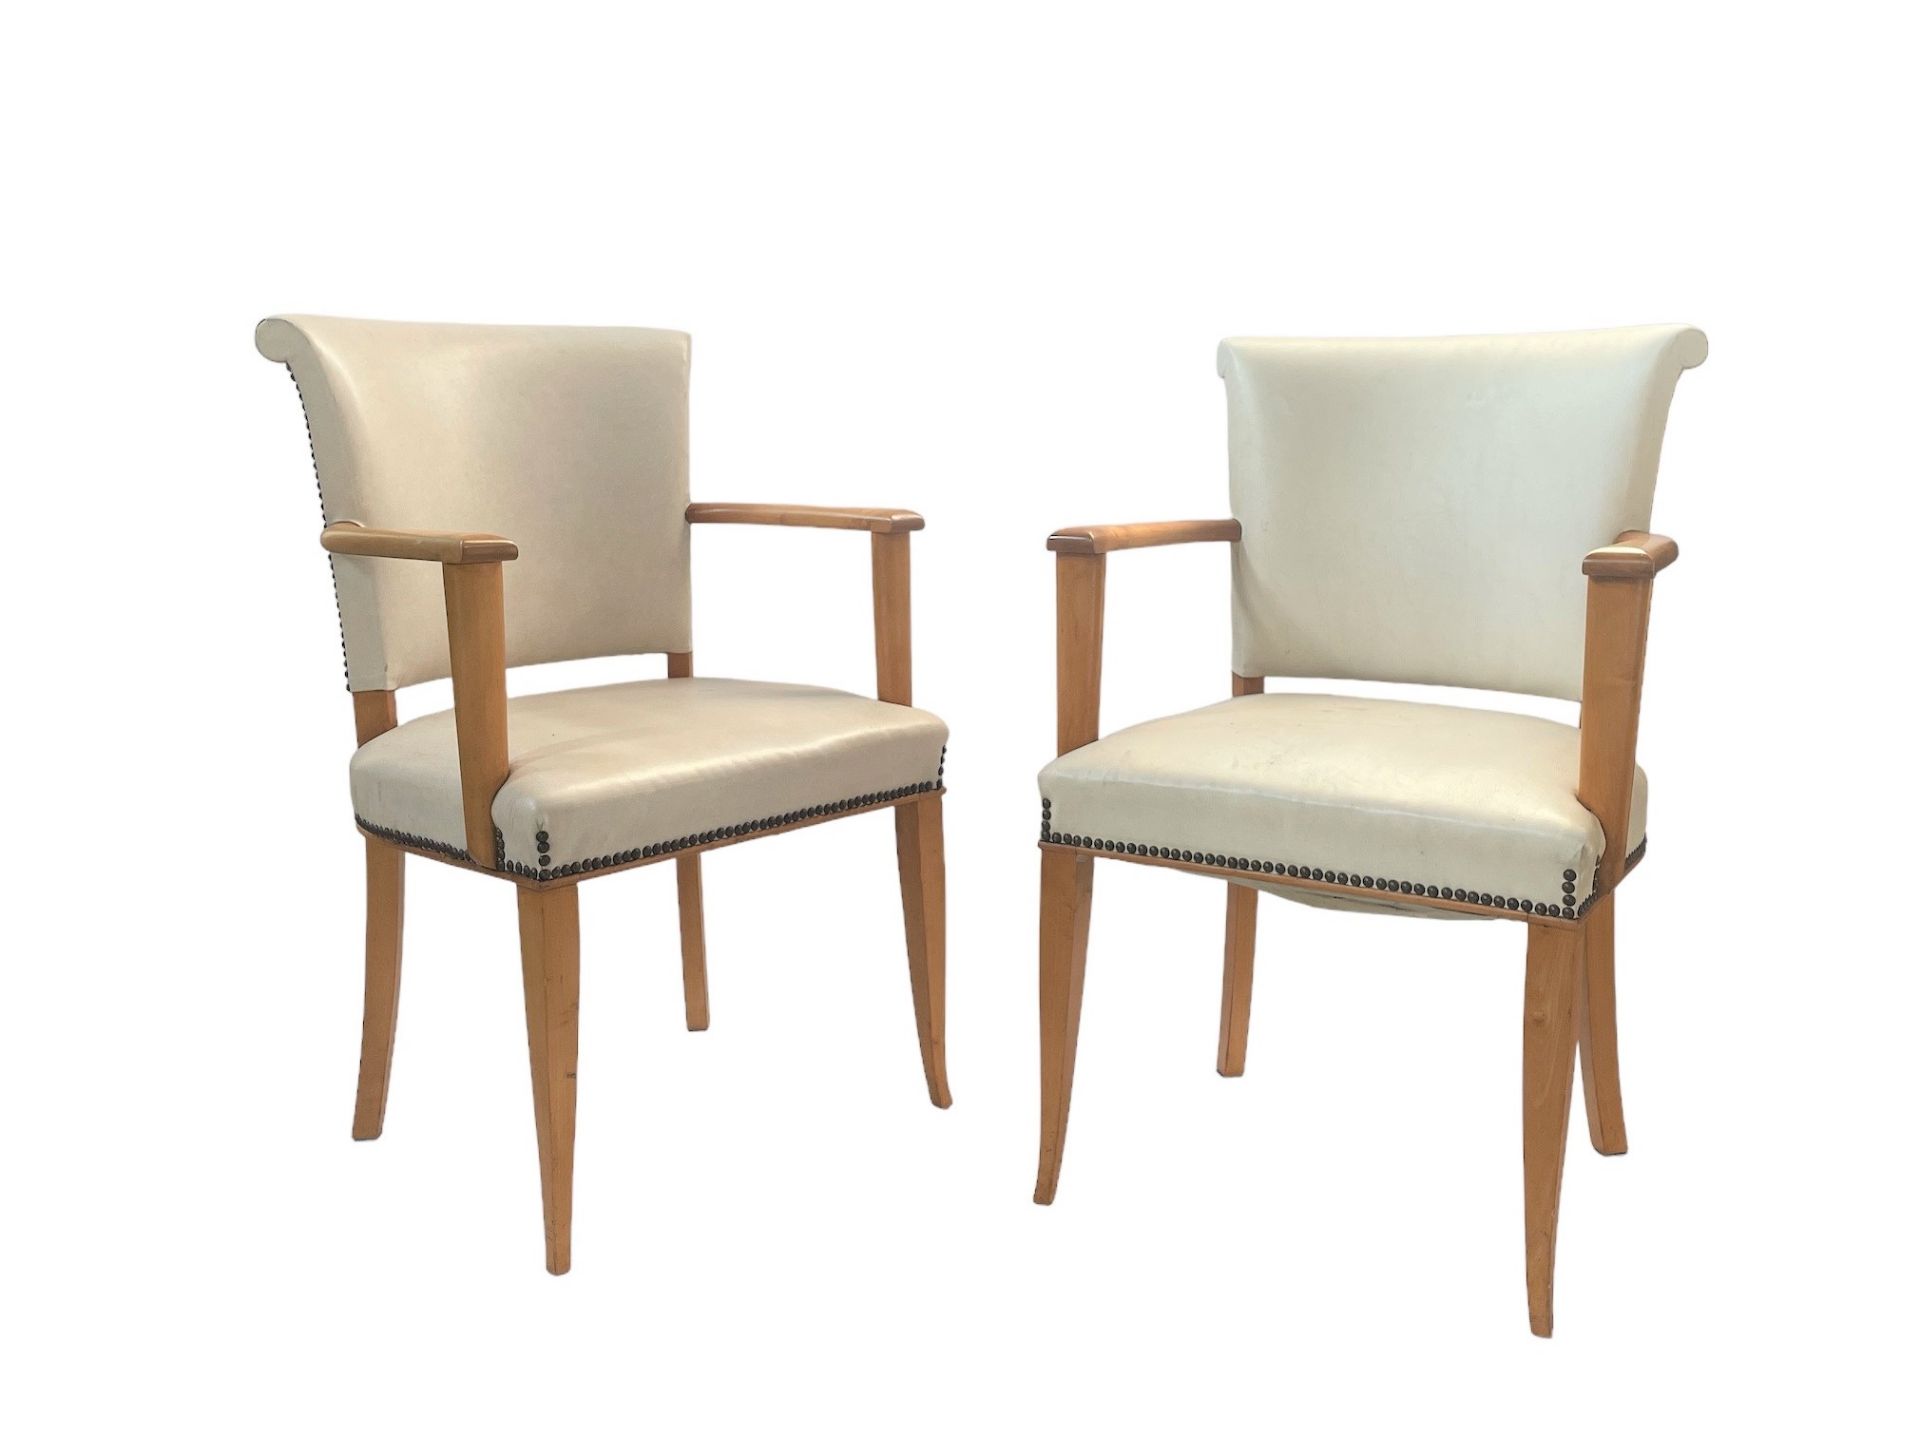 (2) Pair of armchairs in sycamore wood in the style of Art Deco in the taste of Andre Arbus